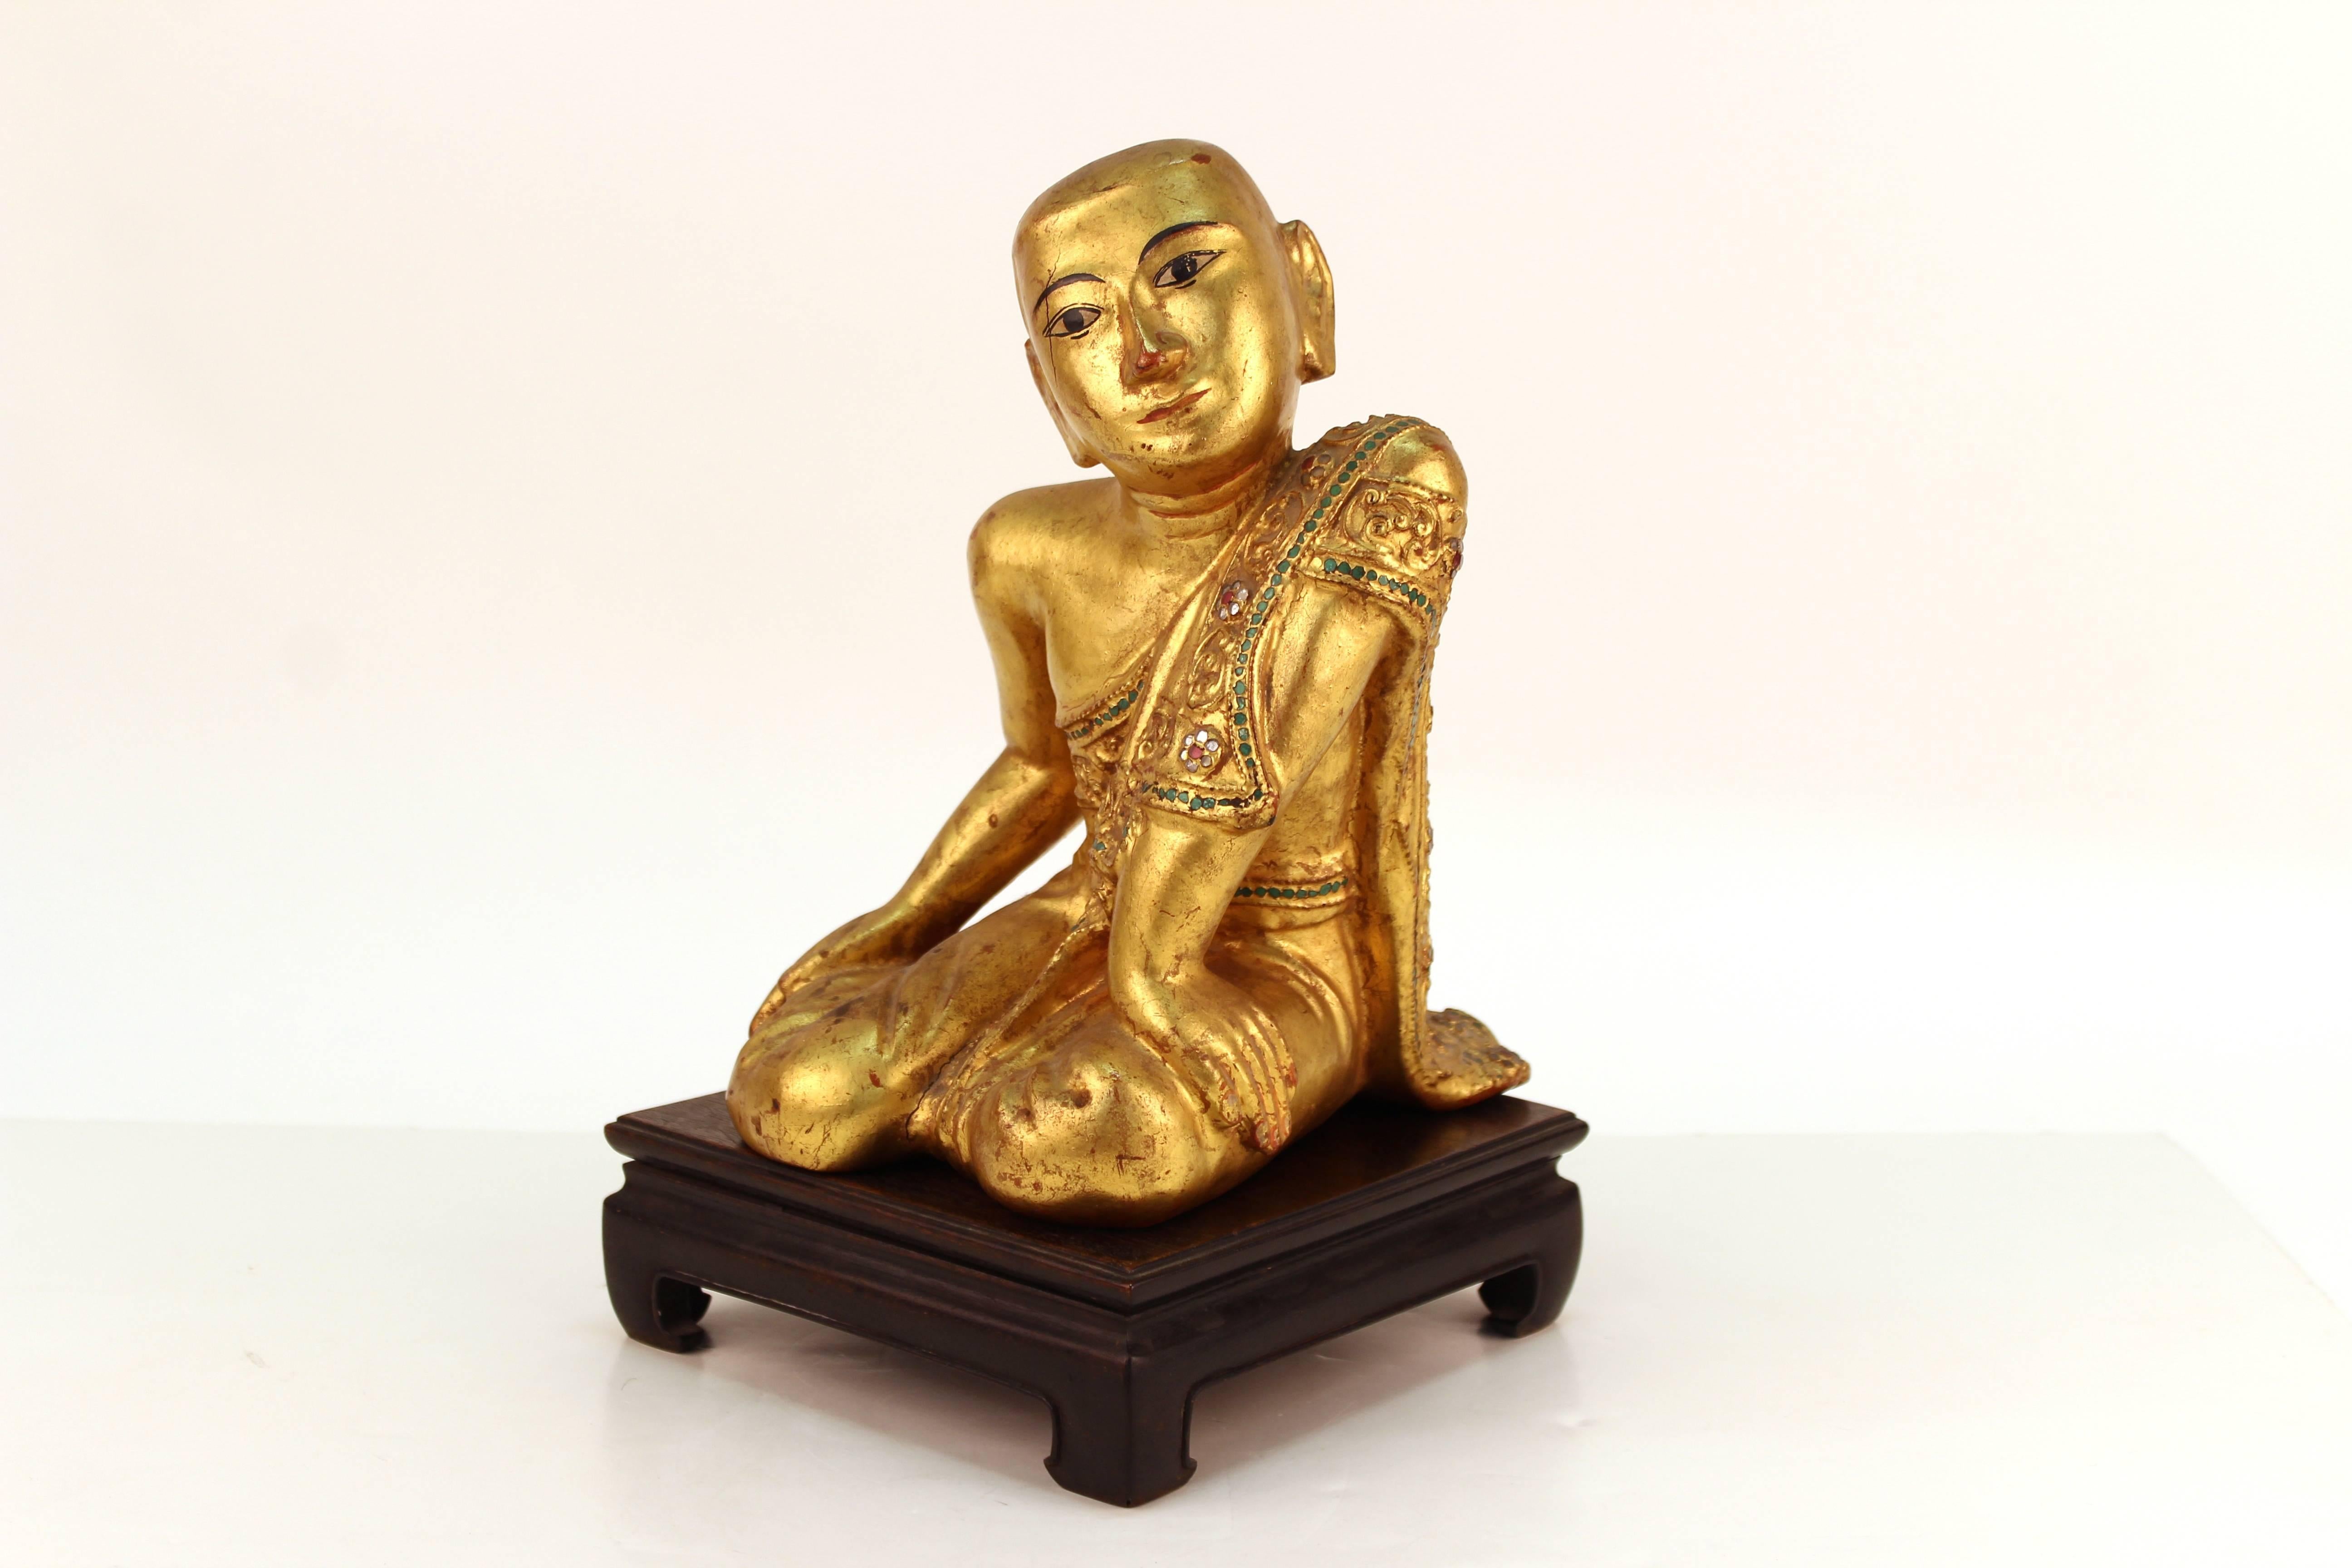 Buddhist monk sculpture from Myanmar (previously Burma). Crafted from carved giltwood. Depicts a young monk in traditional dress. The figure is seated comfortably on his knees leaning on one arm as he looks thoughtfully to the side. The sculpture is